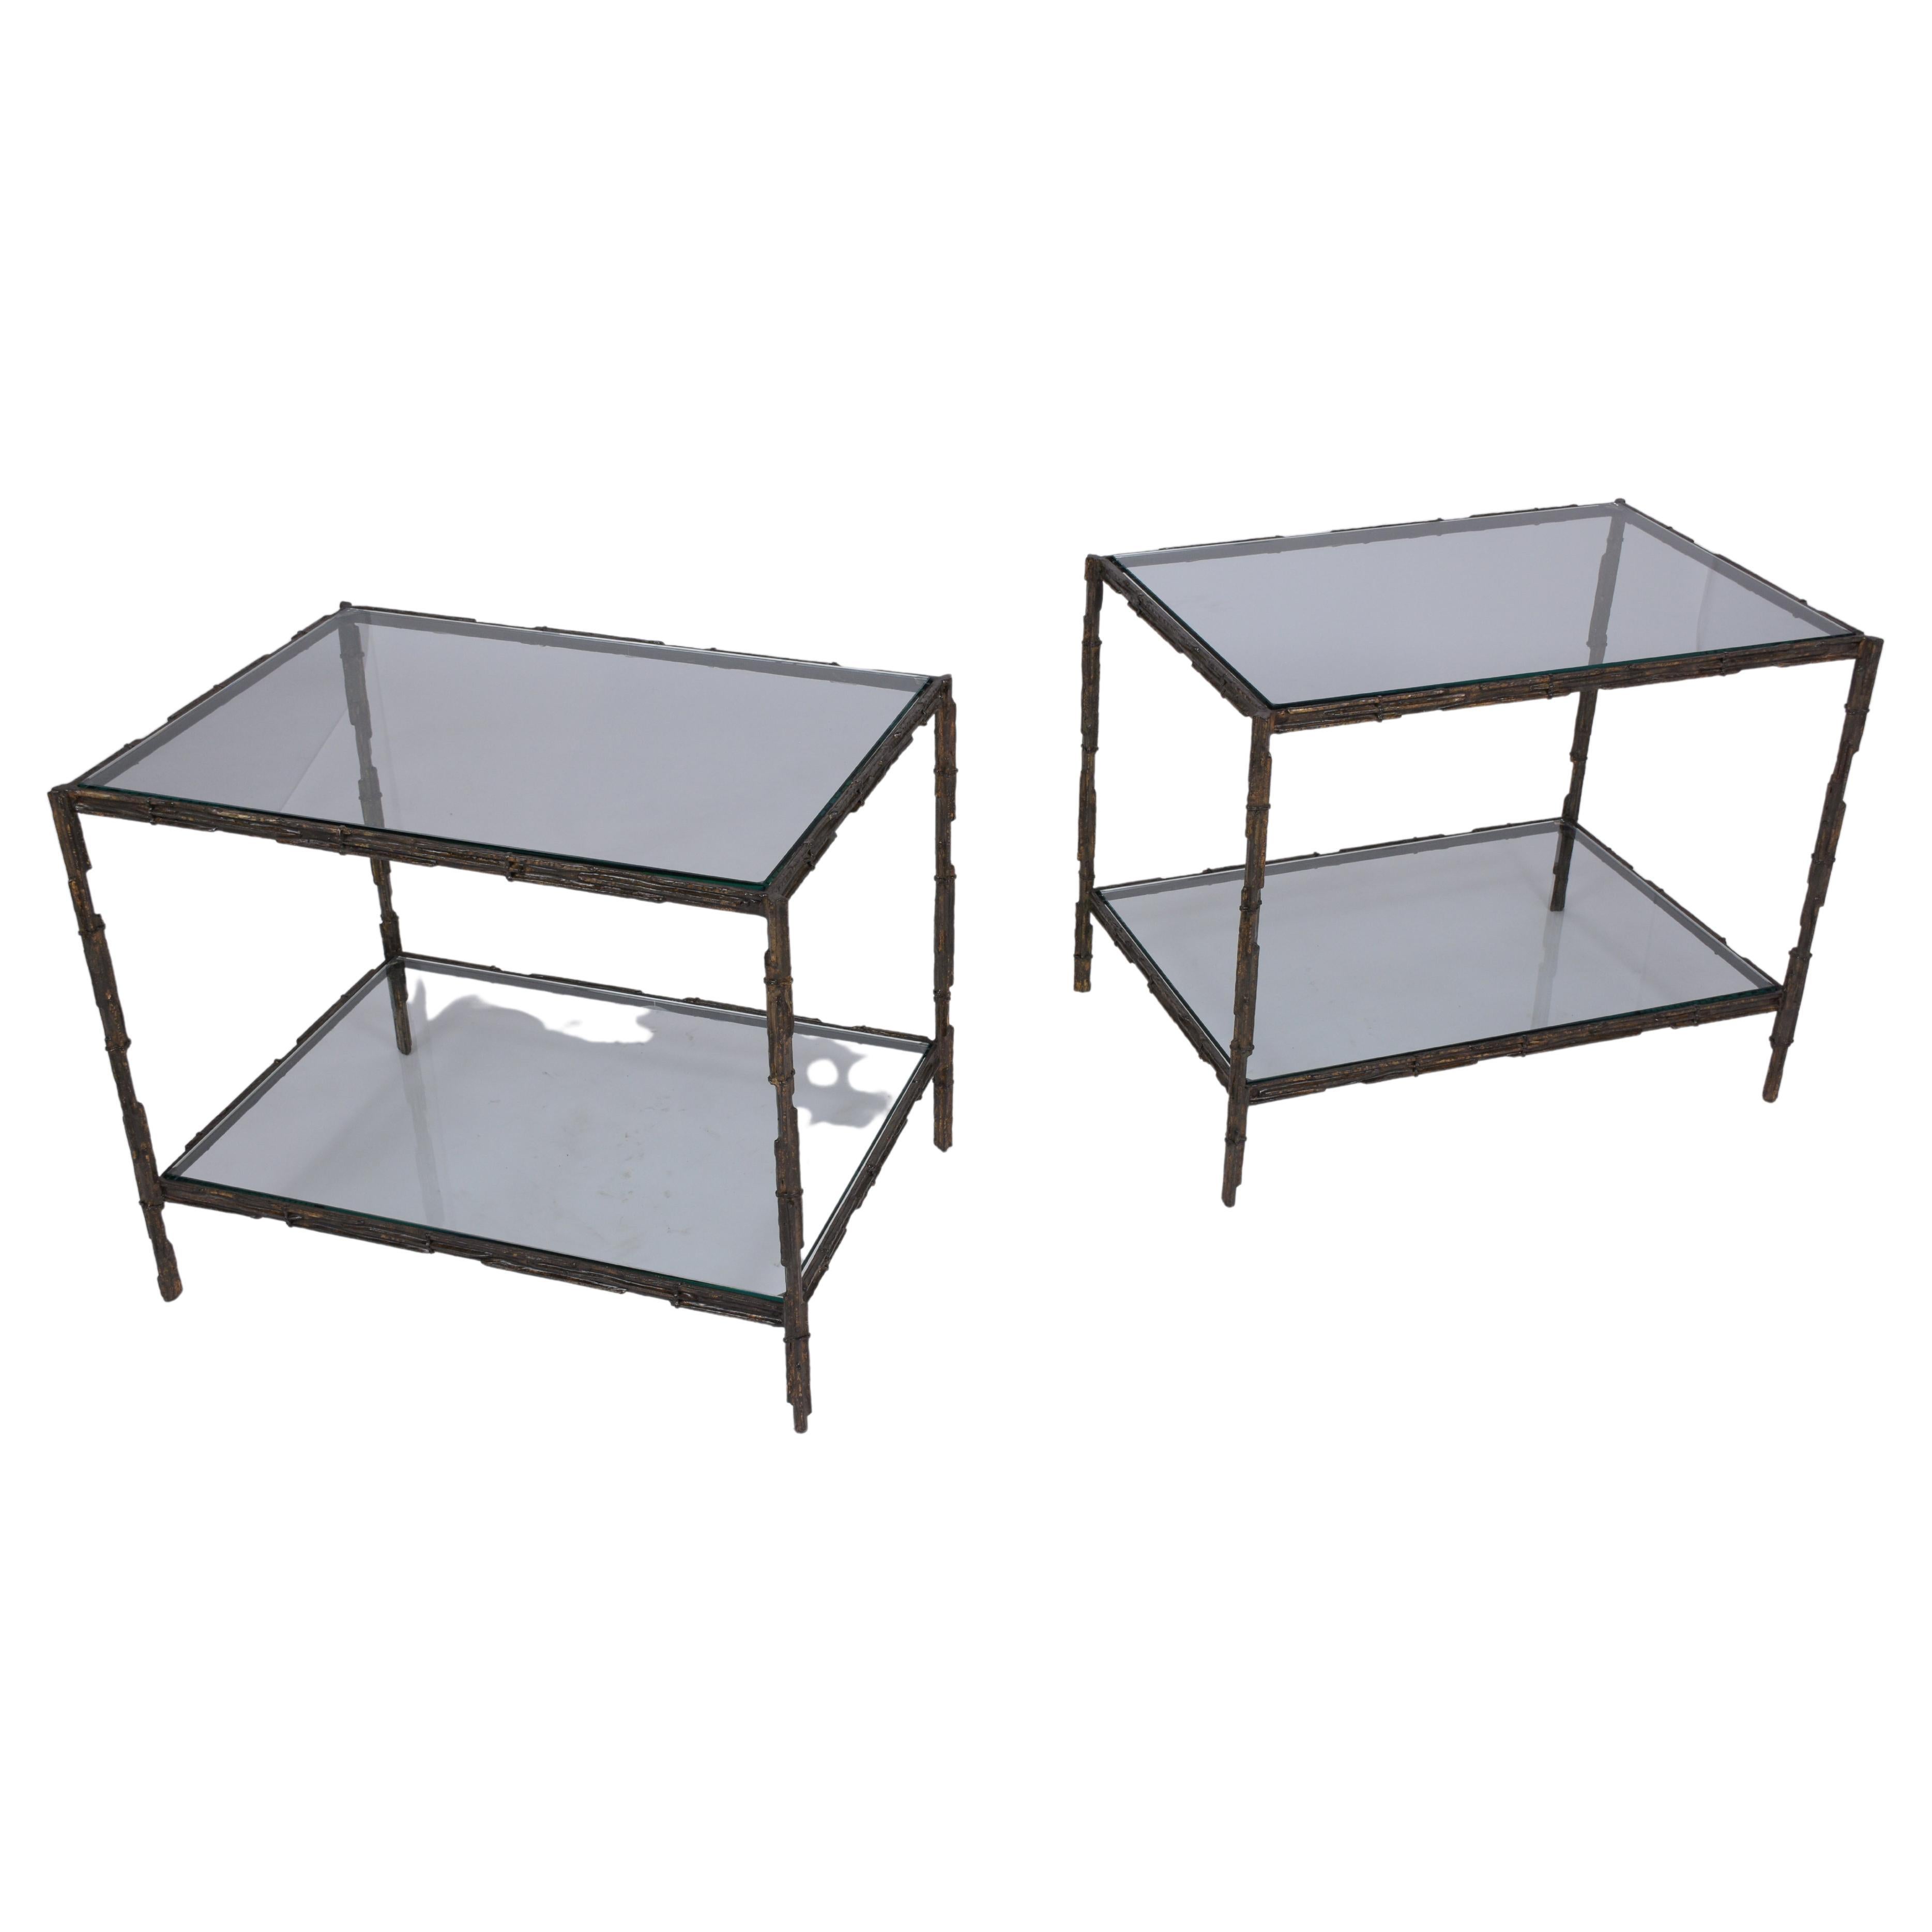 An extraordinary pair of brutalist side tables in great condition beautiful crafted out of iron in great condition and fully restored by our craftsmen. These mid-century end tables feature two-tier tops made from a new clear glass with flat polished